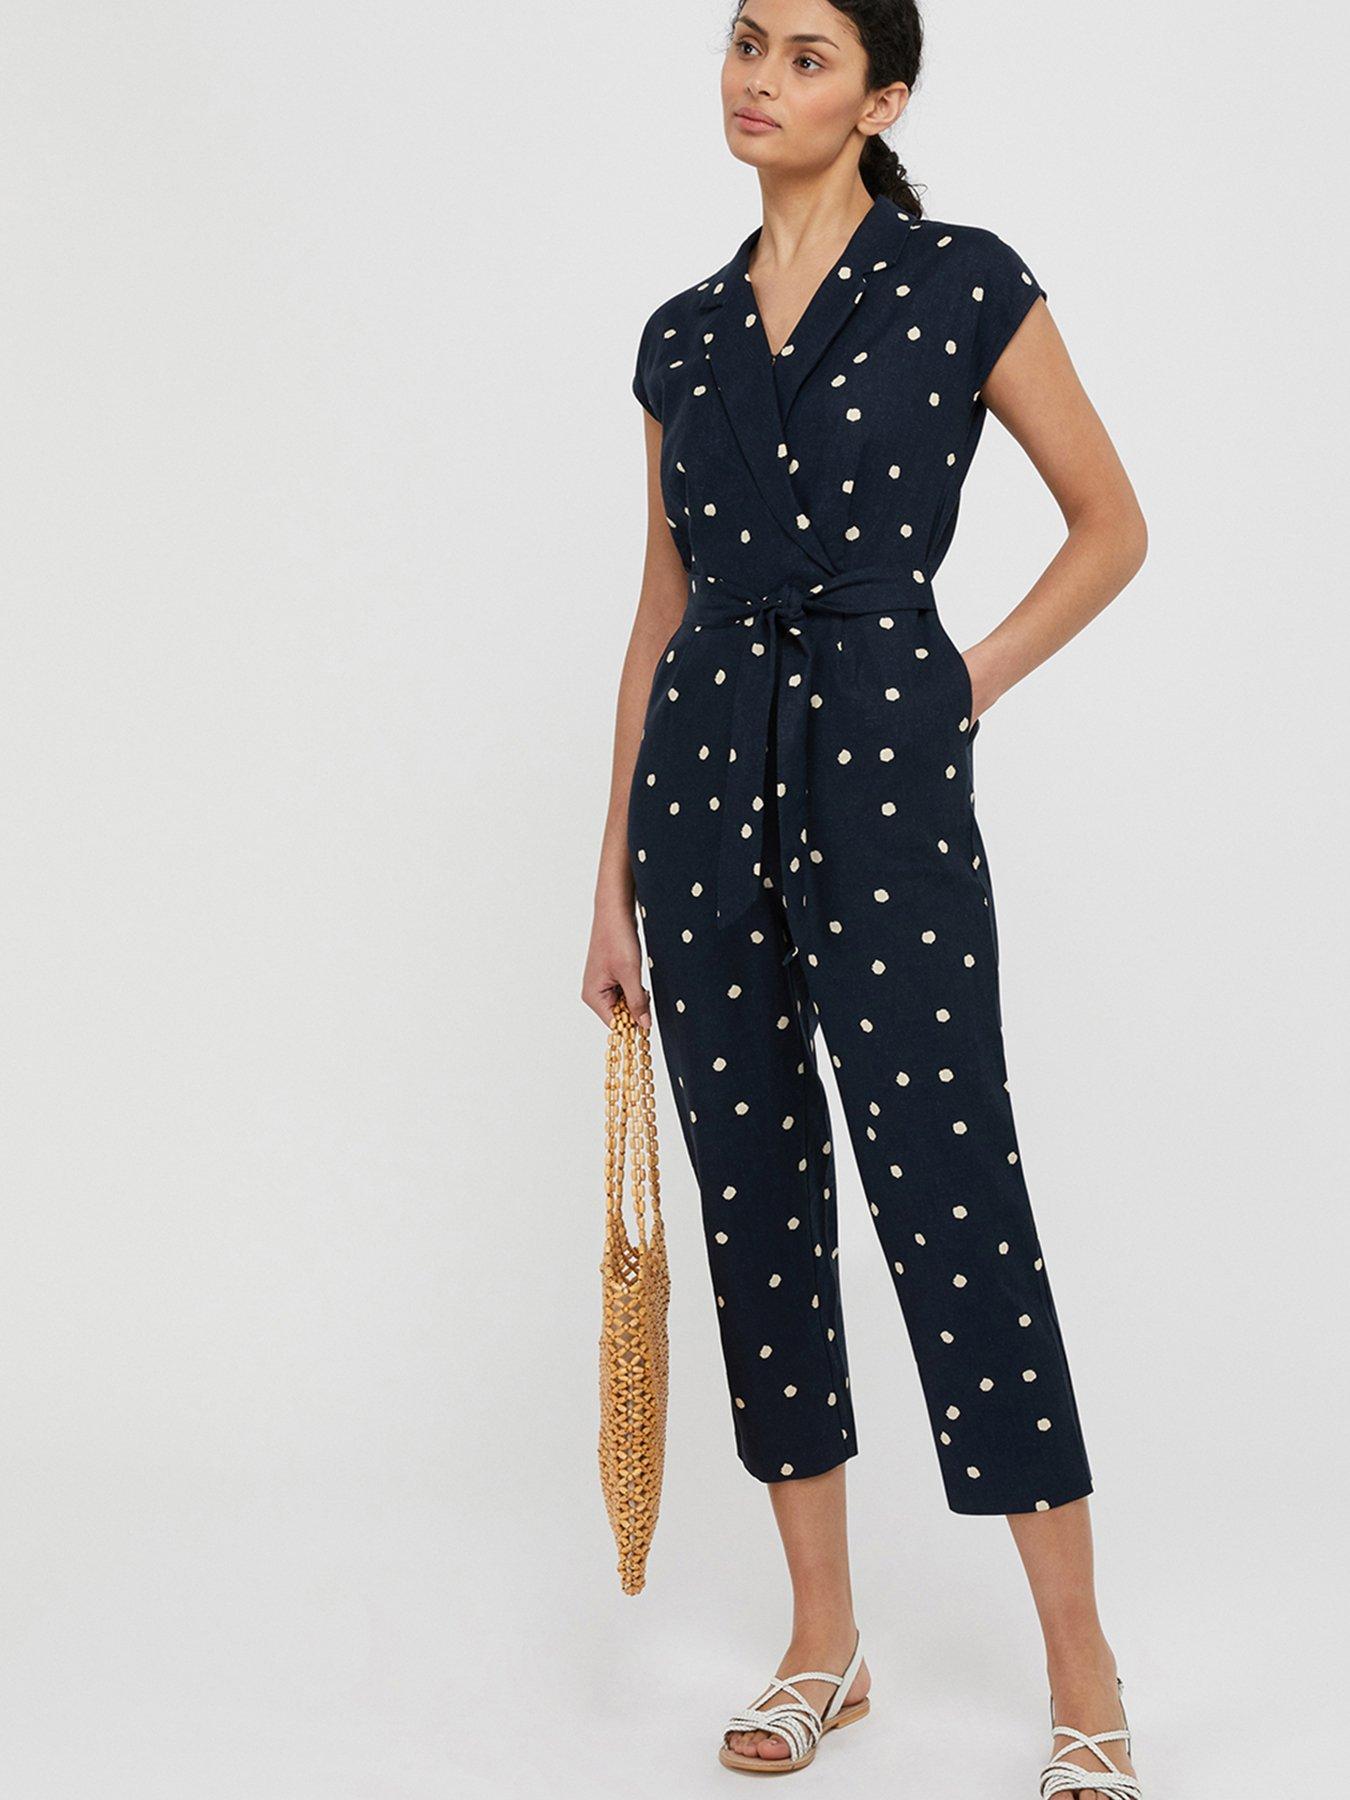 jumpsuits and playsuits uk